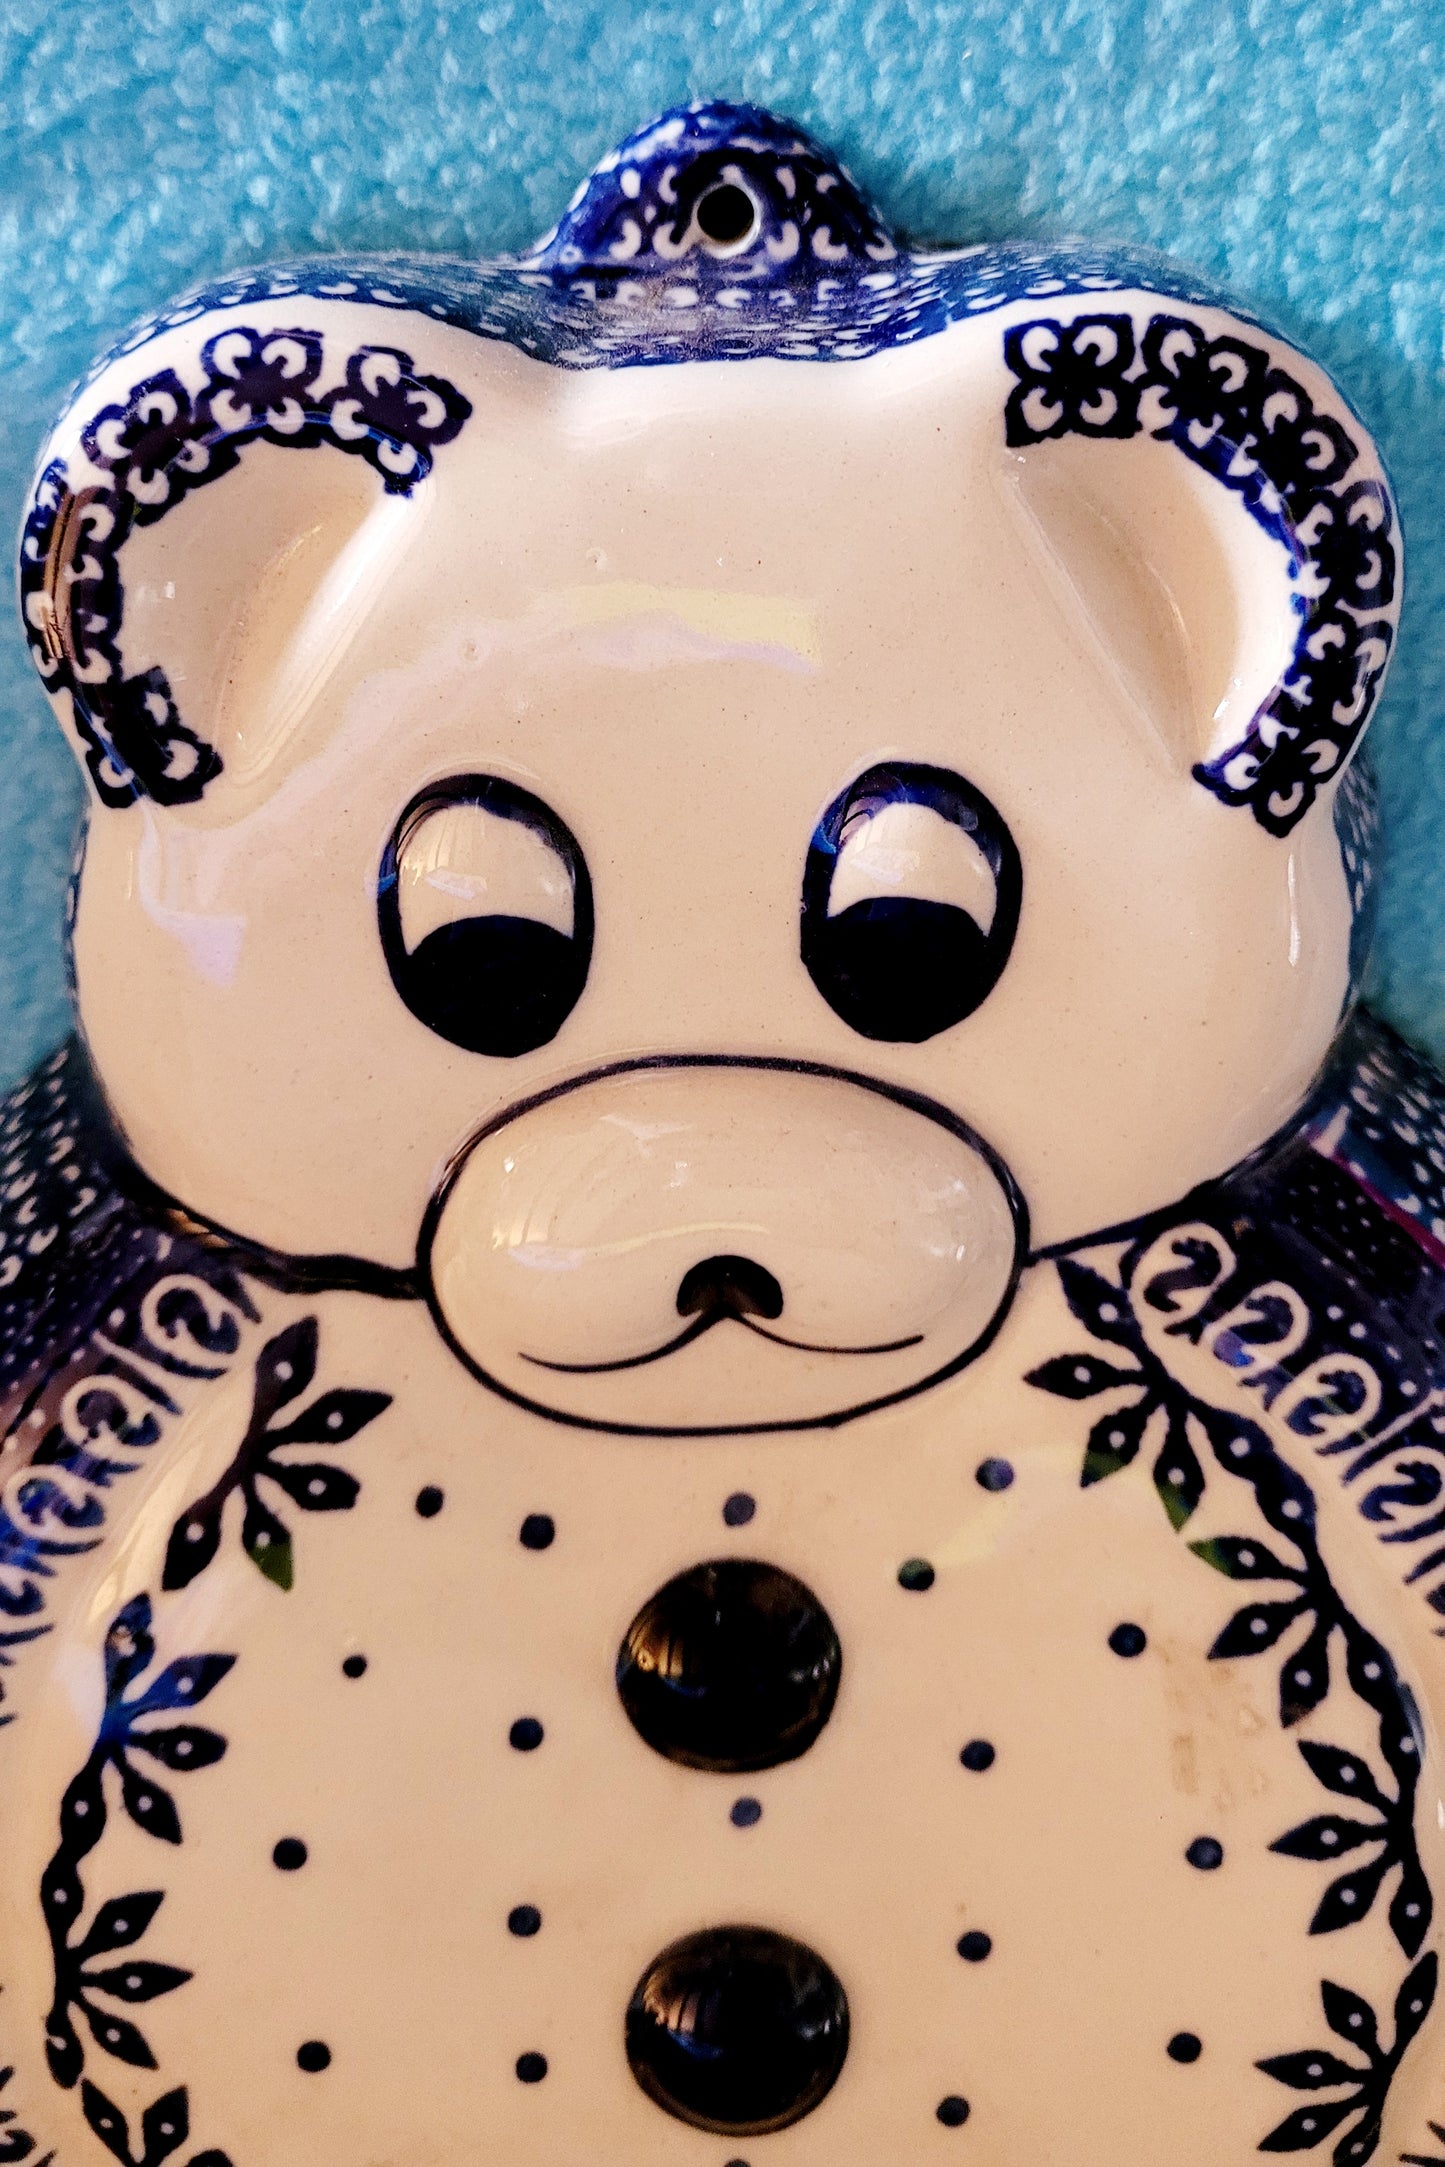 Vintage 'White & Blue' Teddy Bear Mold Wall Hanging by Poland